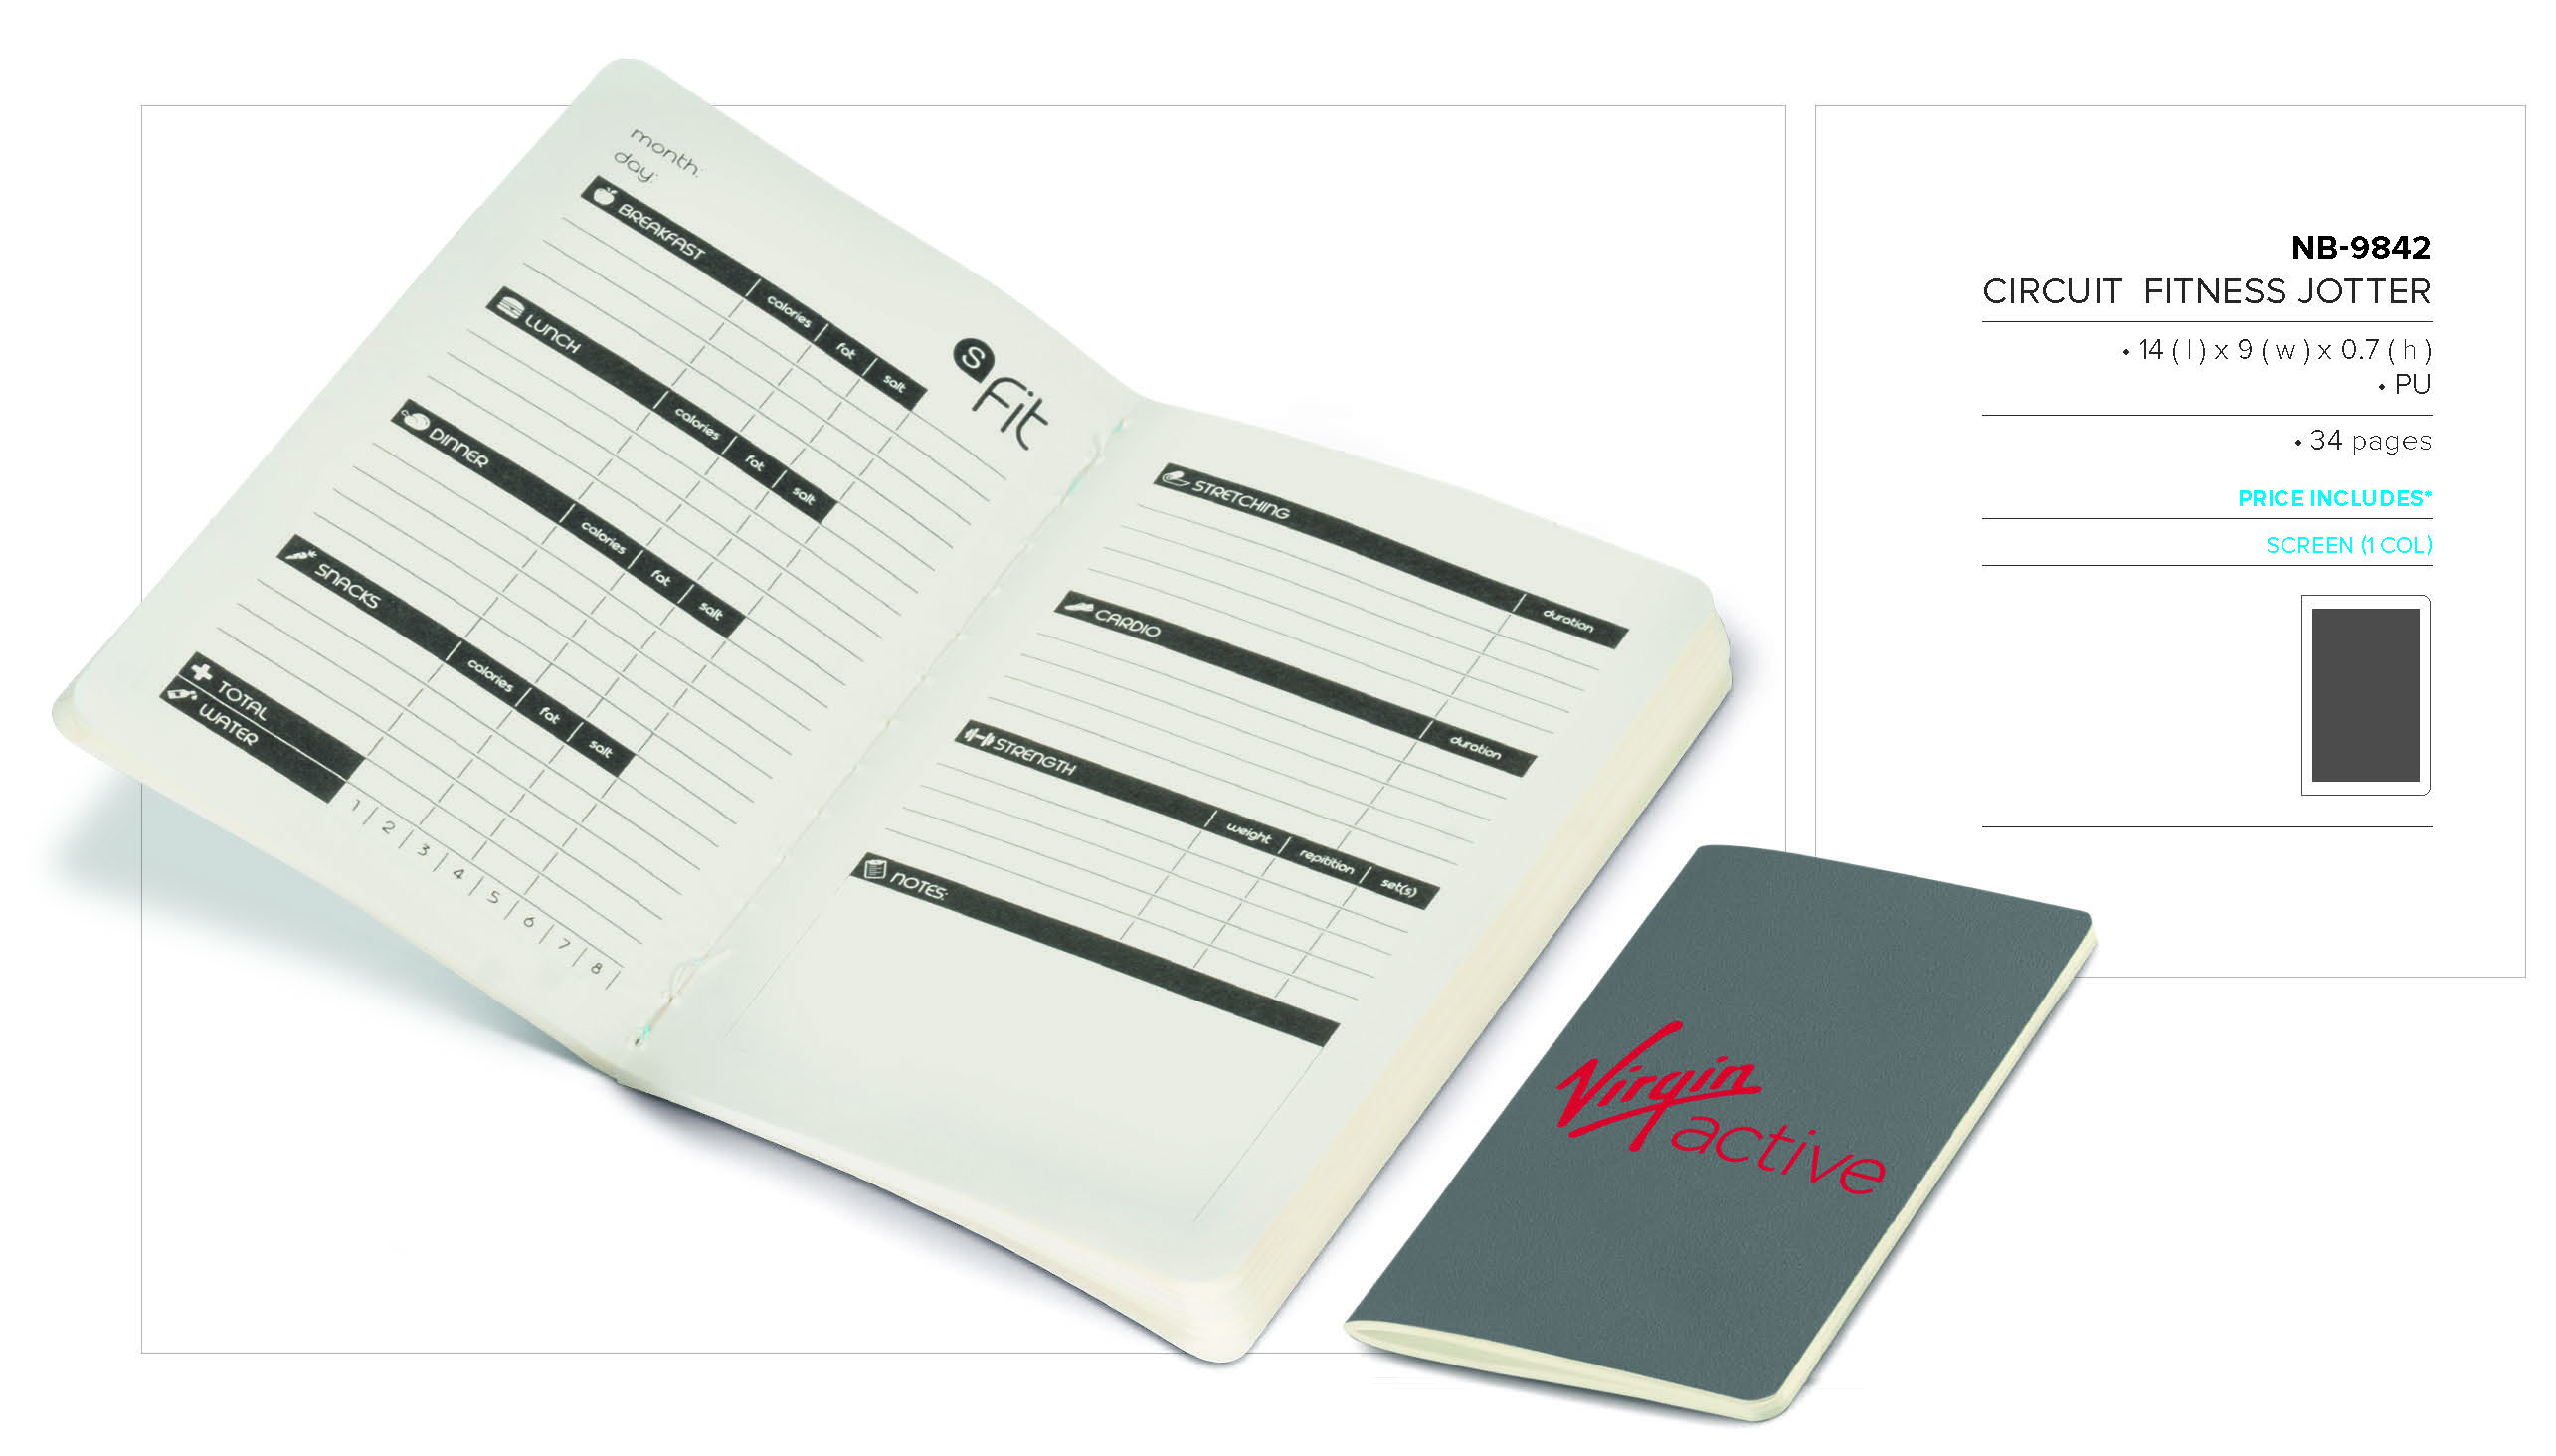 NB-9842 - Circuit Simply Fitness Jotter - Catalogue Image